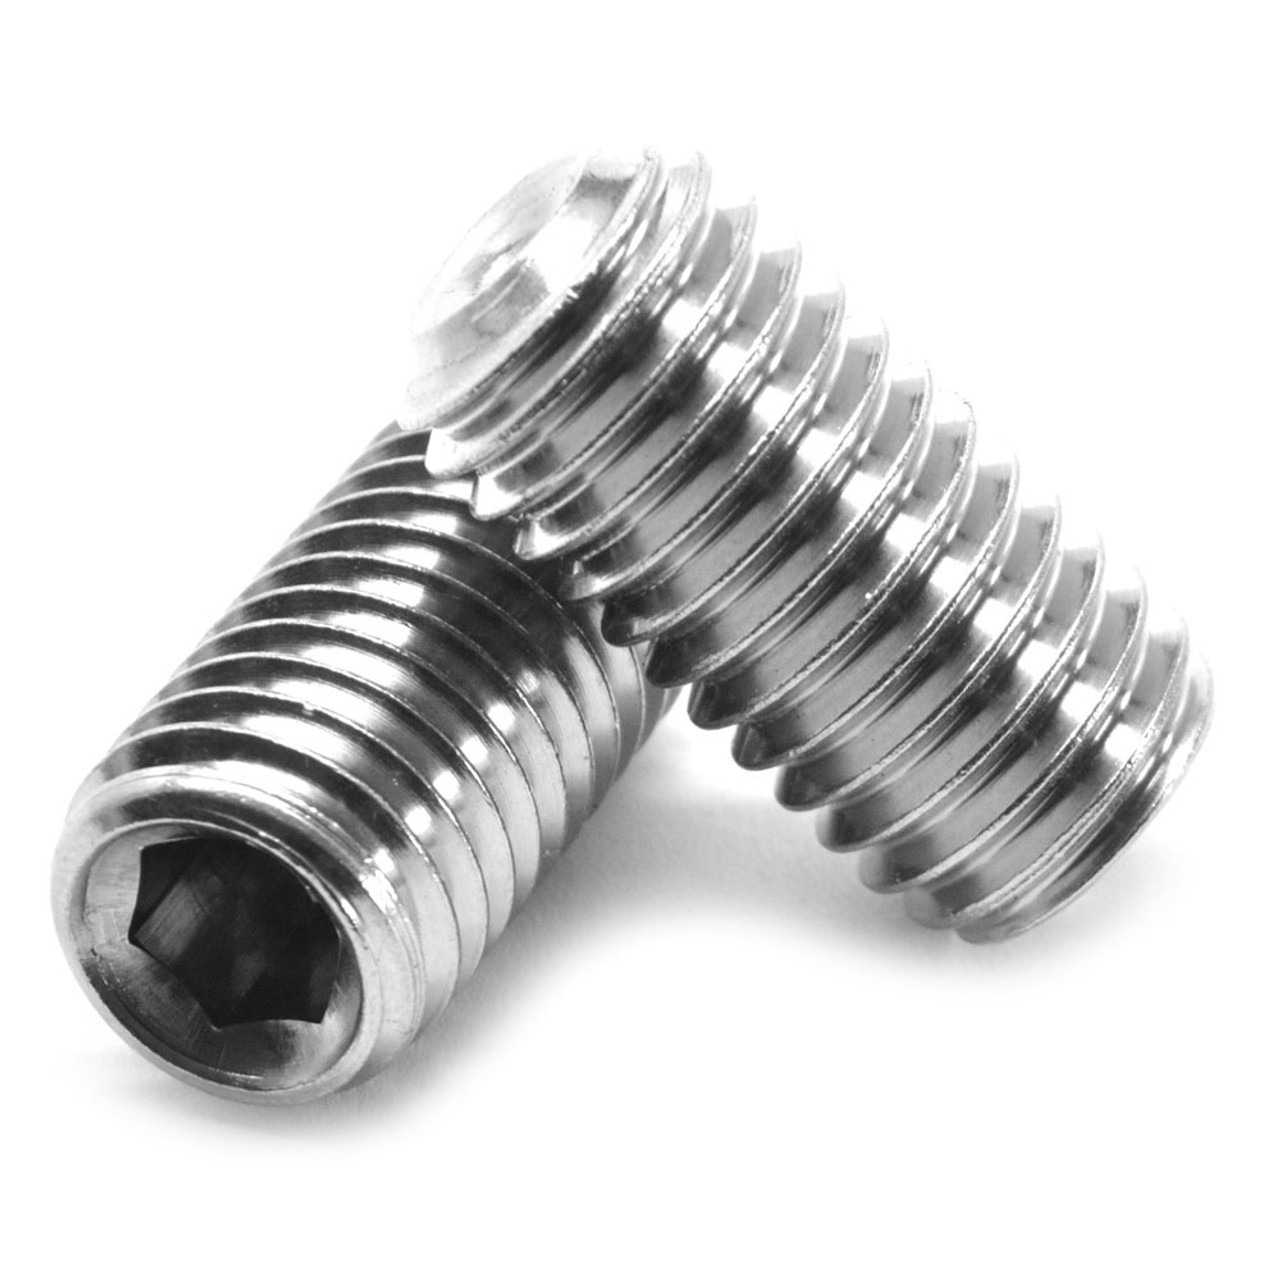 M5 x 0.80 x 10 MM Coarse Thread Socket Set Screw Cup Point Stainless Steel 18-8